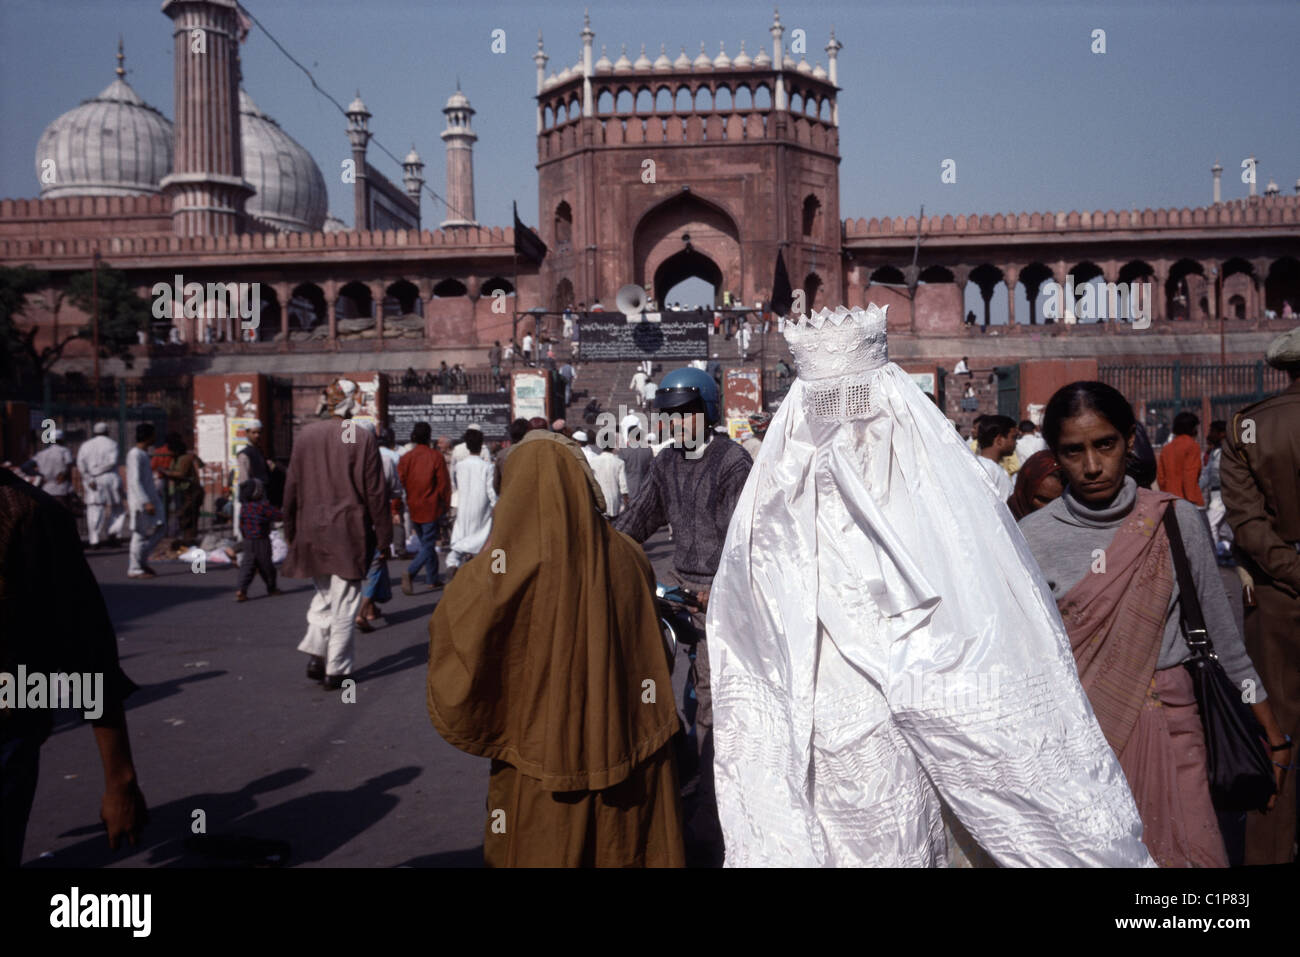 A Muslim woman in a burqa walks near the Jama Masjid in Old Delhi. The Mughal Emperor Shah Jahan constructed the mosque in 1656. Stock Photo